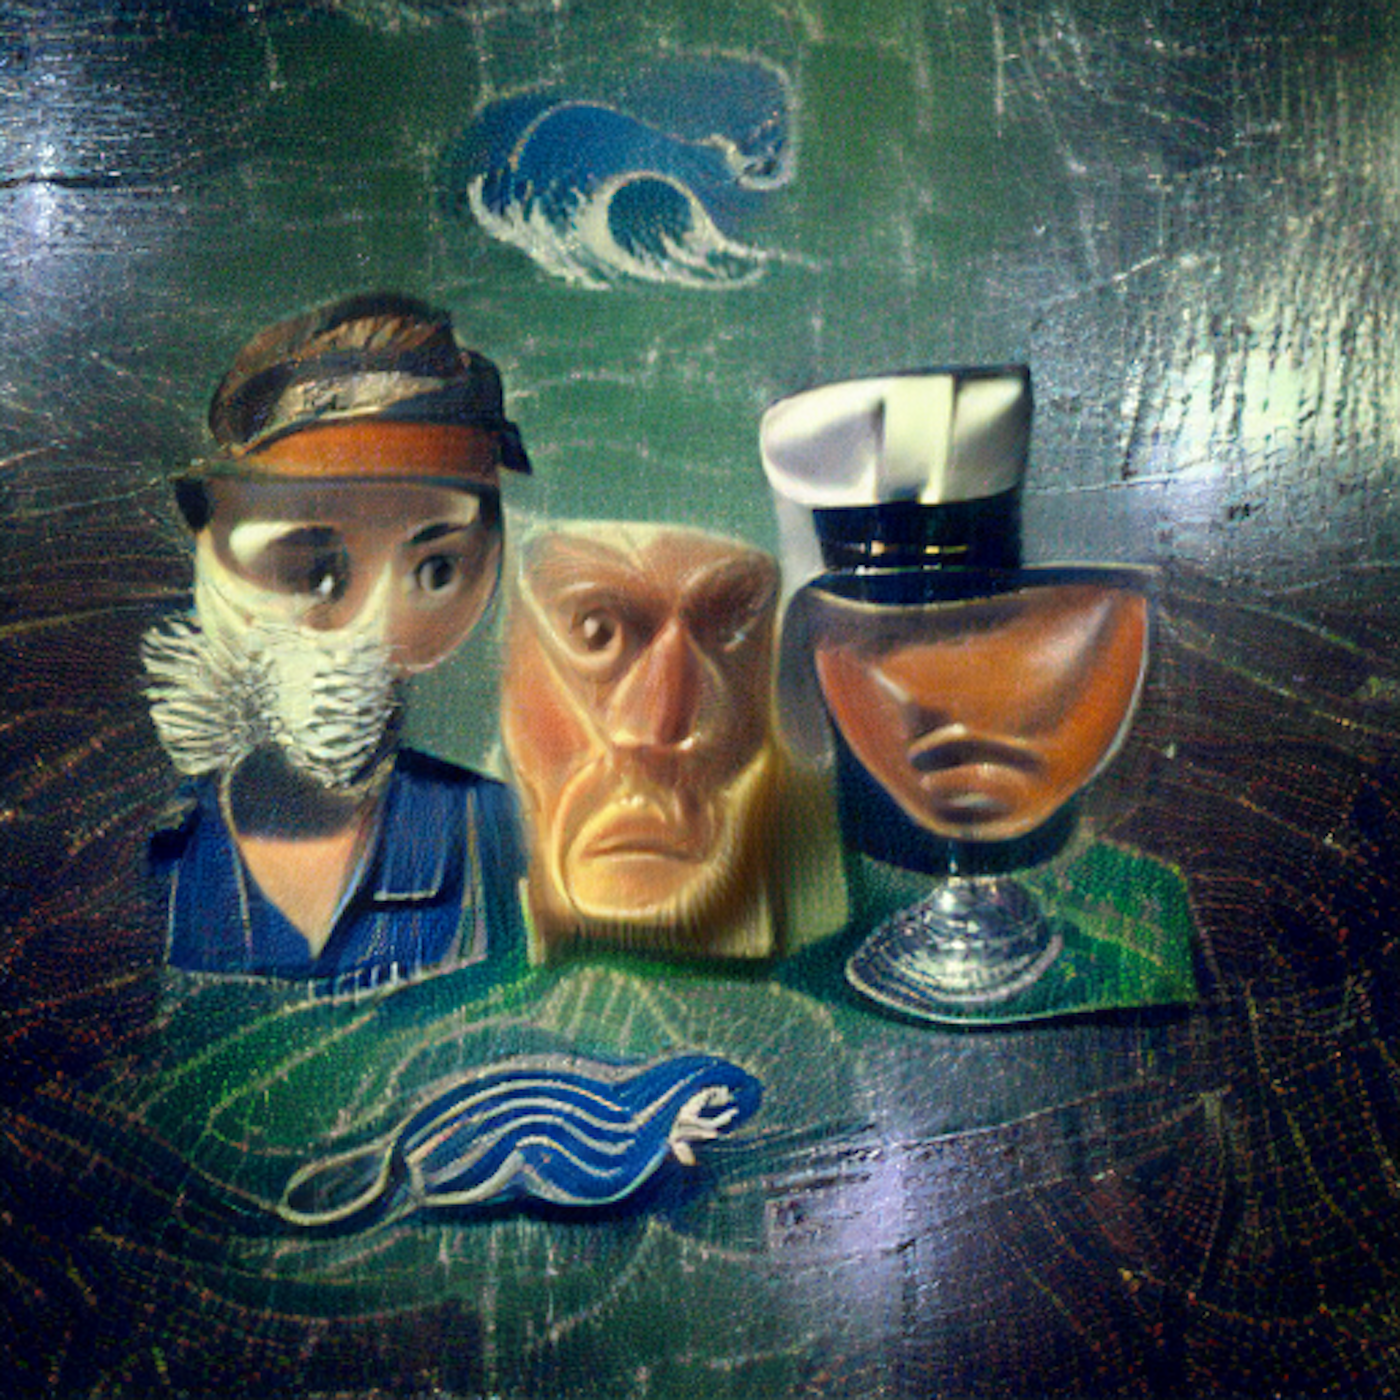 The Zookeeper, the Bartender, and the Seafarer [Waves] hero artwork